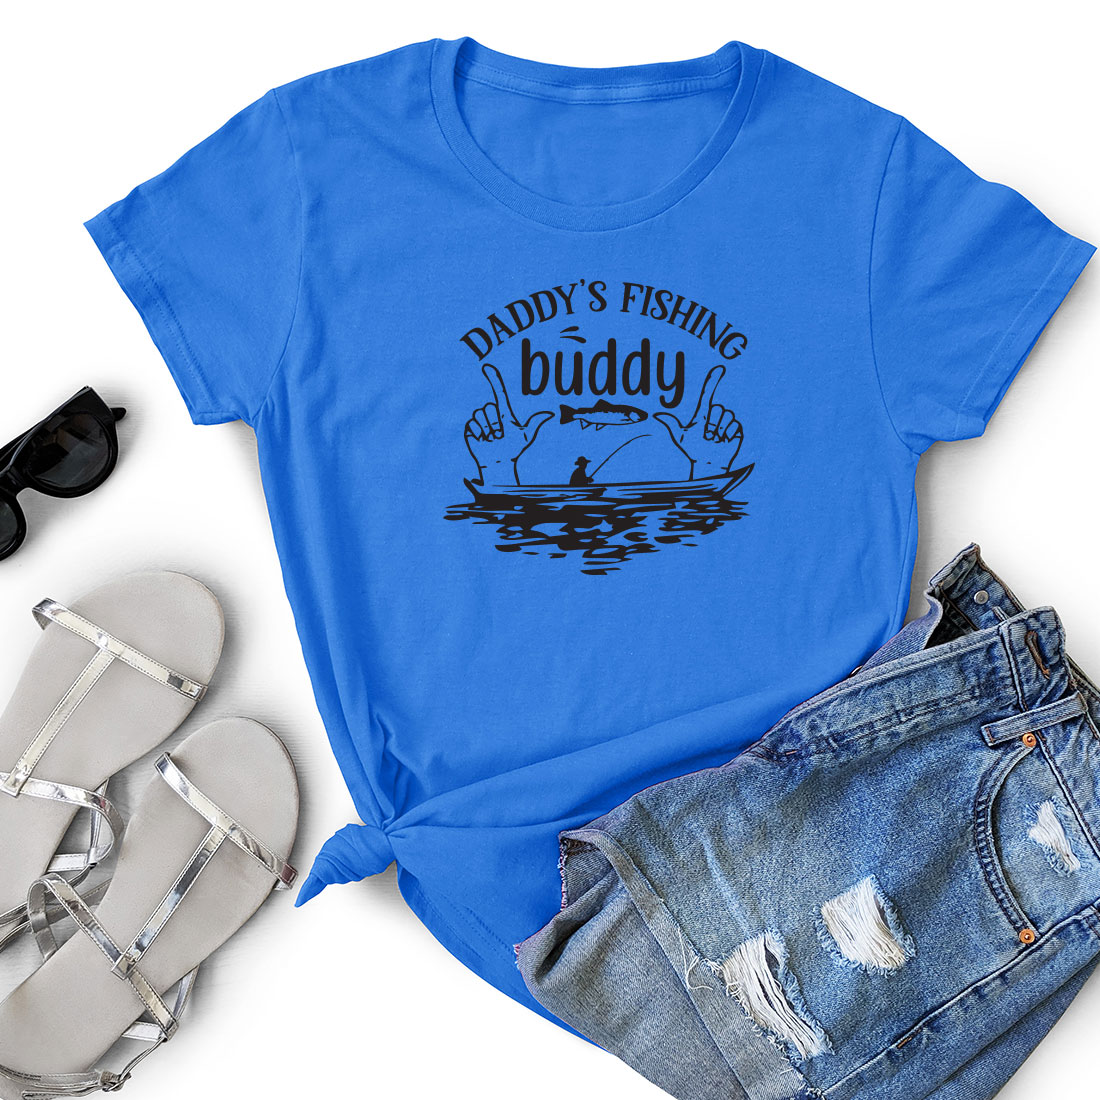 T - shirt that says daddy's fishing buddy next to a pair of.